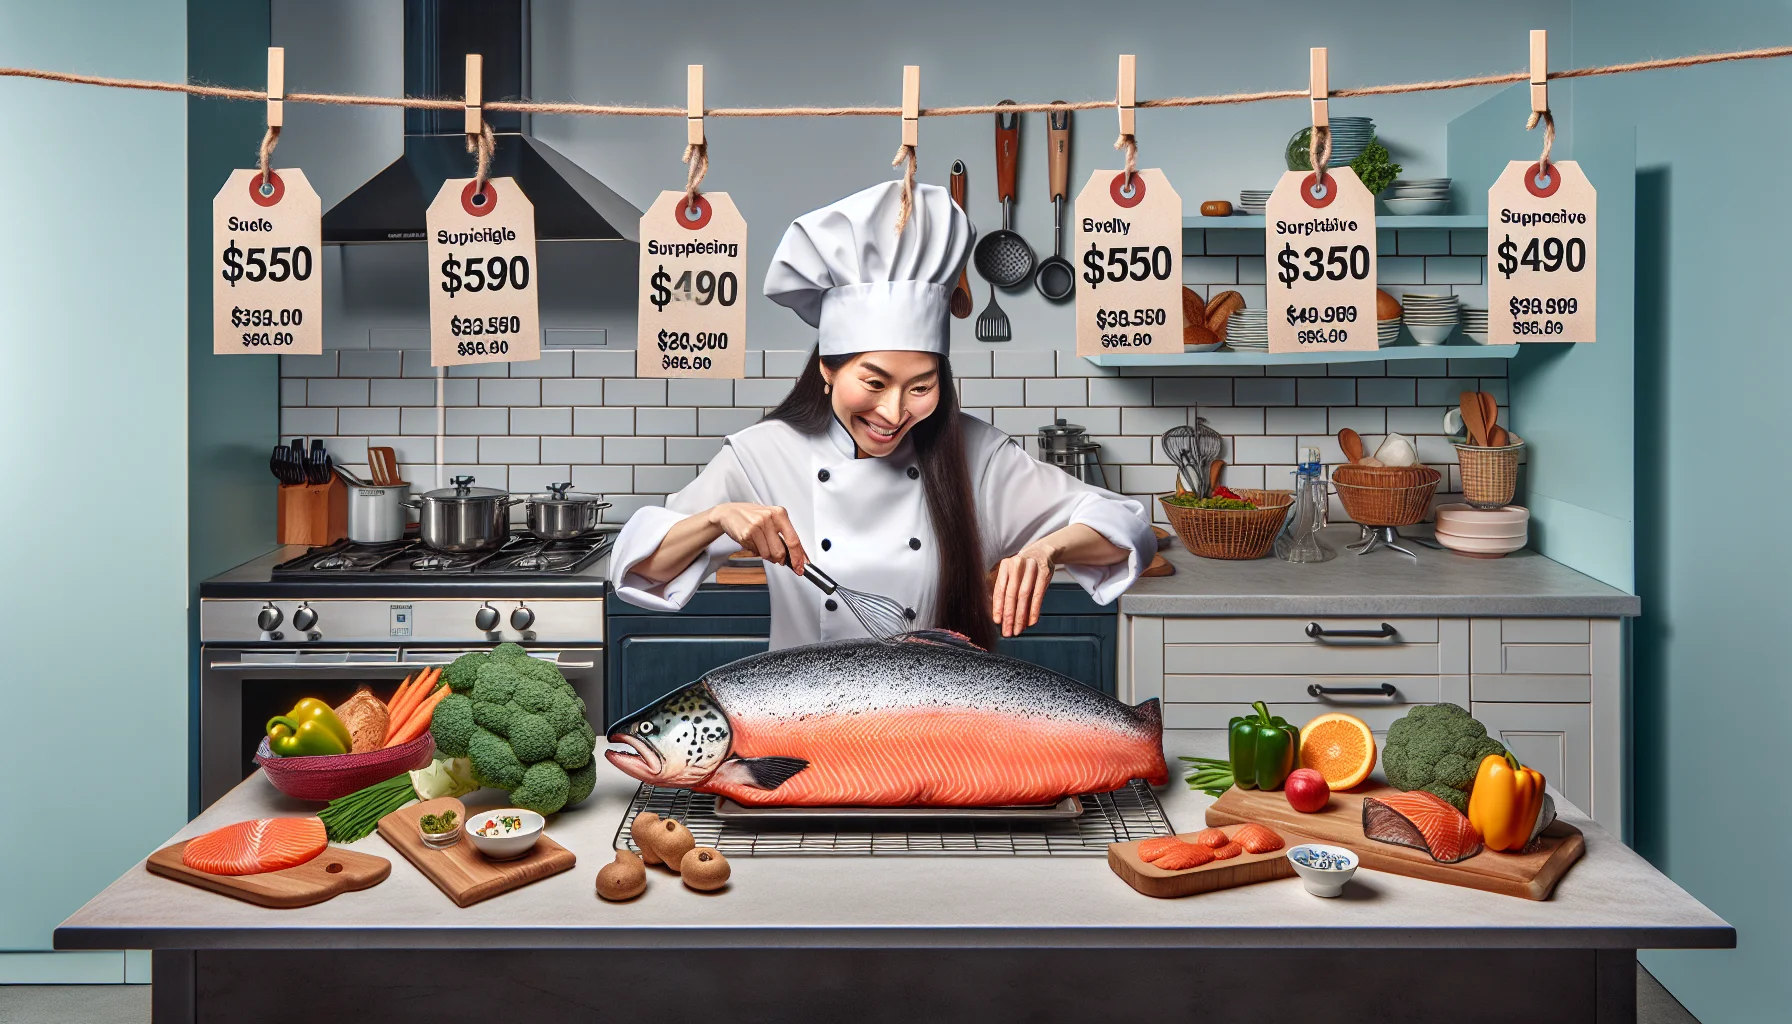 Create a humorous and realistic image depicting a culinary scene where an East Asian woman dressed as a professional chef is baking a large, juicy salmon at a precise temperature of 350 degrees Fahrenheit in a modern kitchen. Around her, price tags comically hang from various healthy ingredients and kitchenwares, each showing surprisingly low prices. The surprising affordability of the meal should be emphasized for comedy and to emphasize the message that eating healthy doesn't have to be expensive.